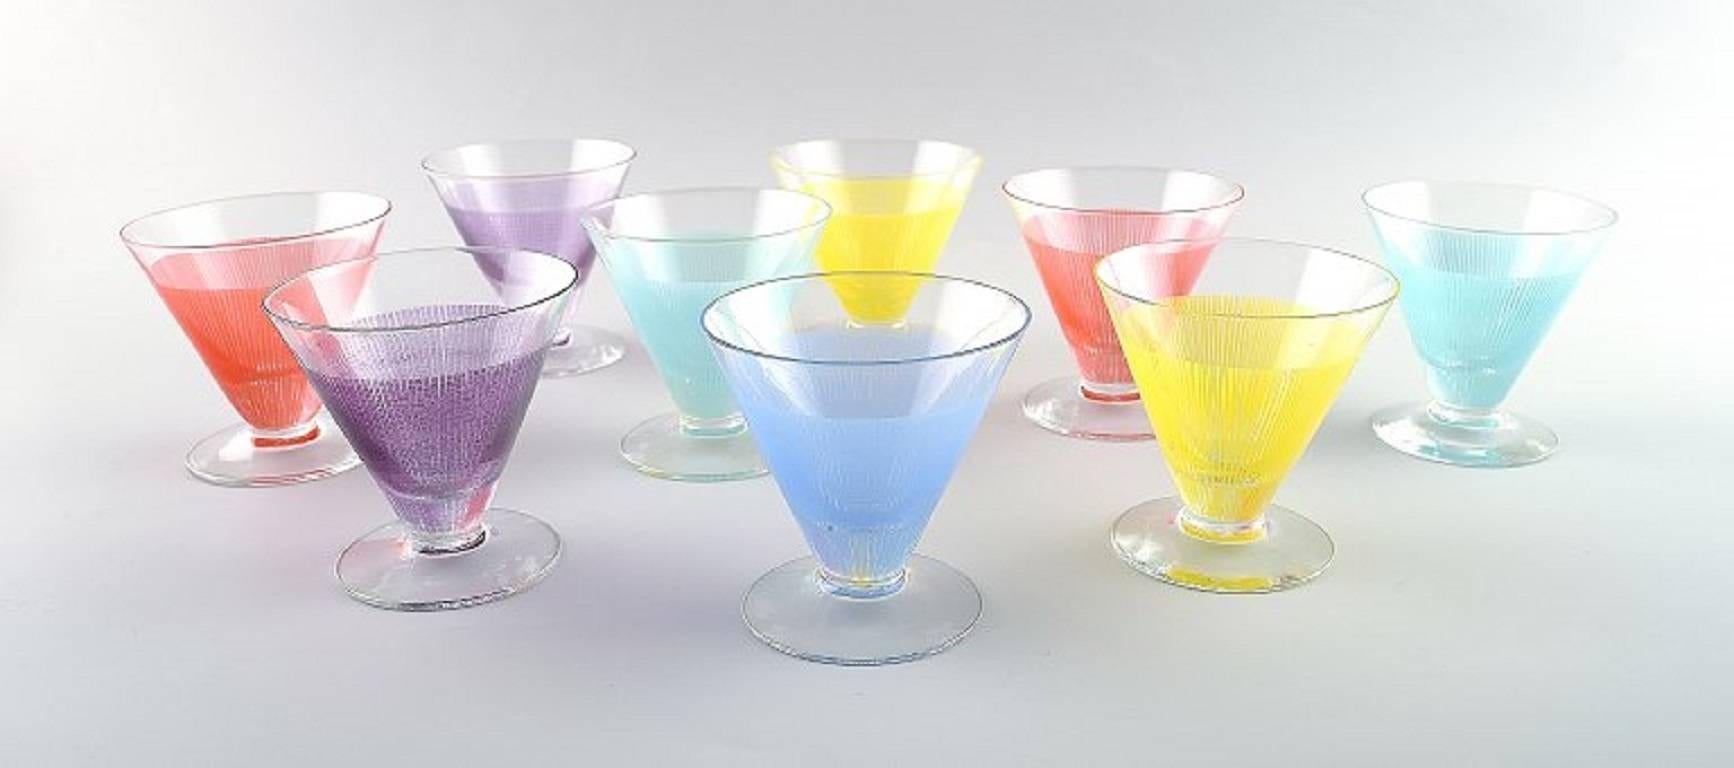 Nine cocktail glass "Party", Bengt Orup, Johansfors, Sweden.

Designed in 1953.

Measures 7.5 cm. x 7.5 cm.

In perfect condition.